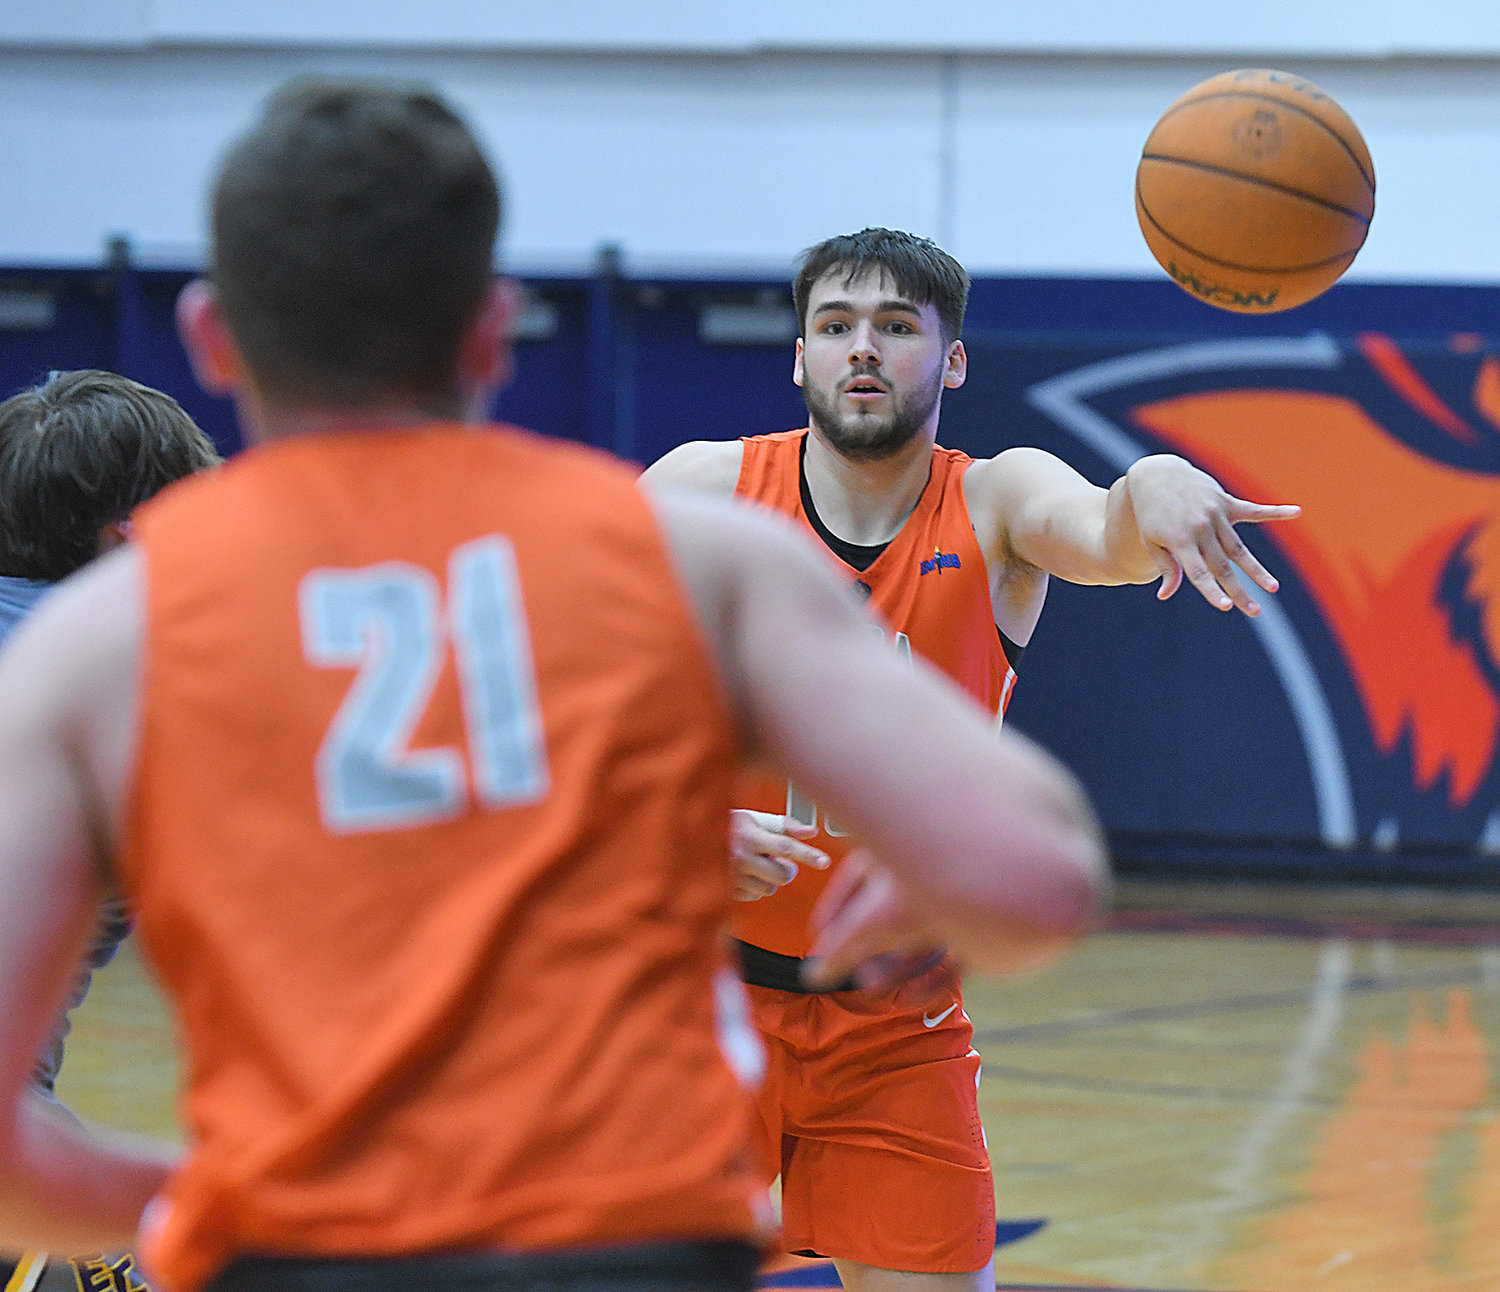 Utica University’s Damien Call passes the ball down to teammate Thomas Morreale during Friday night’s Empire 8 game against visiting Elmira College at Clark Athletic Center. The Pioneers won 72-53.